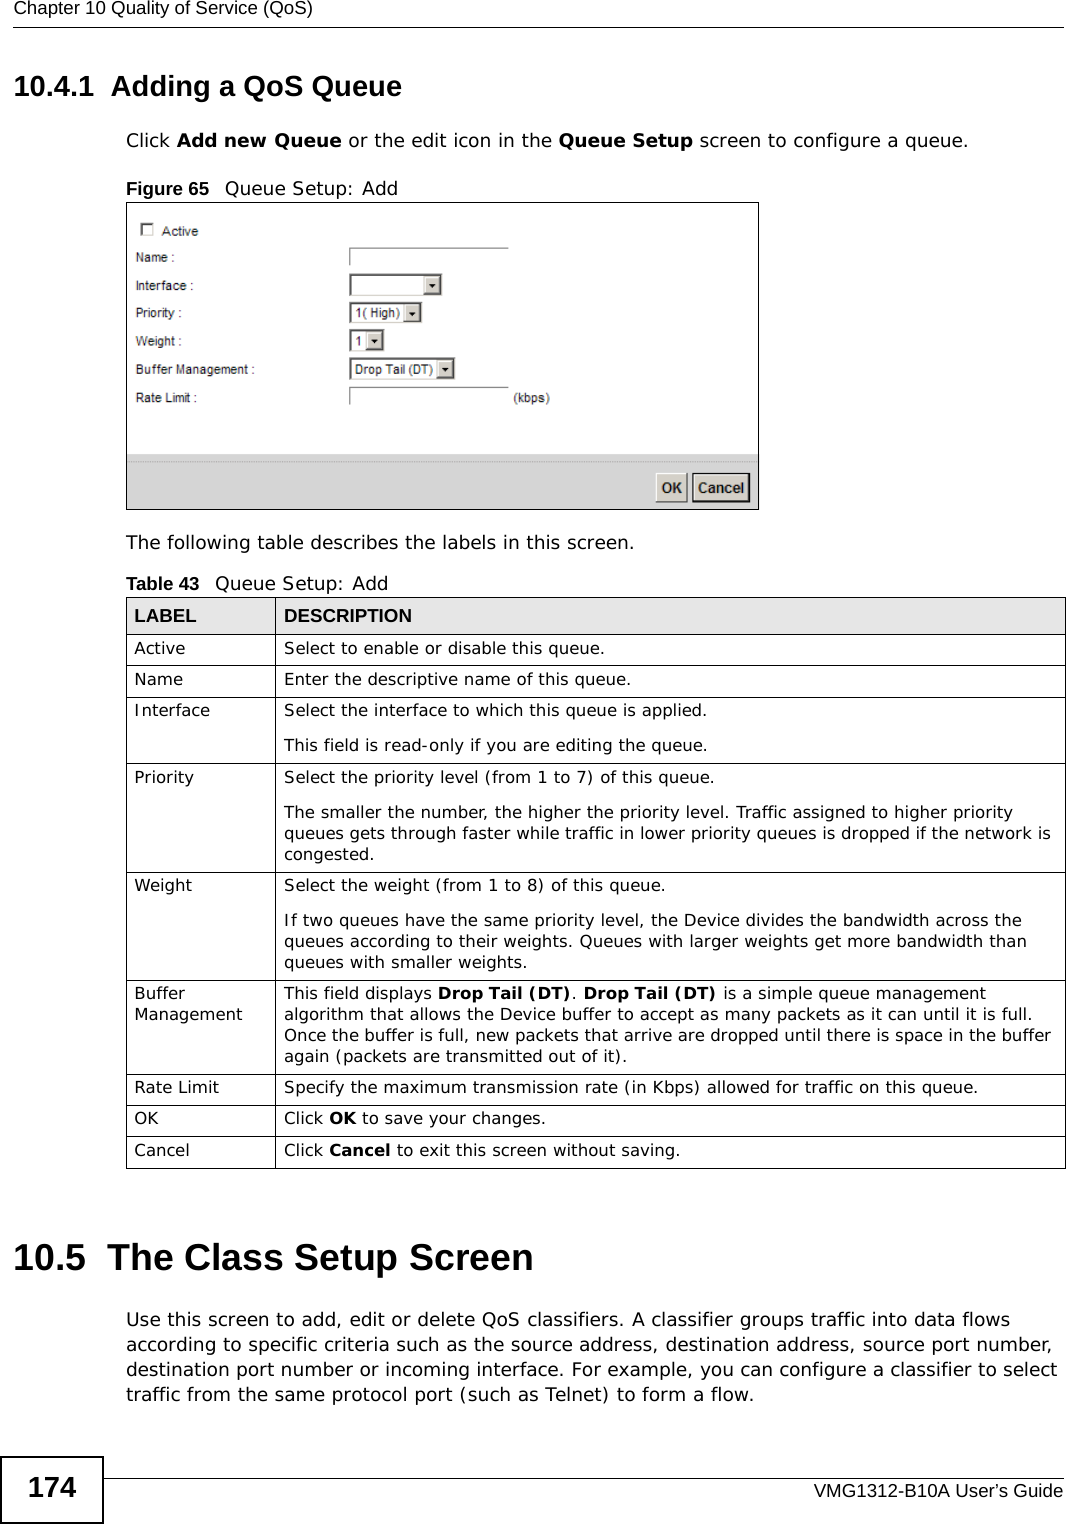 Chapter 10 Quality of Service (QoS)VMG1312-B10A User’s Guide17410.4.1  Adding a QoS Queue Click Add new Queue or the edit icon in the Queue Setup screen to configure a queue. Figure 65   Queue Setup: Add The following table describes the labels in this screen.  10.5  The Class Setup Screen Use this screen to add, edit or delete QoS classifiers. A classifier groups traffic into data flows according to specific criteria such as the source address, destination address, source port number, destination port number or incoming interface. For example, you can configure a classifier to select traffic from the same protocol port (such as Telnet) to form a flow.Table 43   Queue Setup: AddLABEL DESCRIPTIONActive Select to enable or disable this queue.Name Enter the descriptive name of this queue.Interface Select the interface to which this queue is applied.This field is read-only if you are editing the queue.Priority Select the priority level (from 1 to 7) of this queue.The smaller the number, the higher the priority level. Traffic assigned to higher priority queues gets through faster while traffic in lower priority queues is dropped if the network is congested.Weight Select the weight (from 1 to 8) of this queue. If two queues have the same priority level, the Device divides the bandwidth across the queues according to their weights. Queues with larger weights get more bandwidth than queues with smaller weights.Buffer Management This field displays Drop Tail (DT). Drop Tail (DT) is a simple queue management algorithm that allows the Device buffer to accept as many packets as it can until it is full. Once the buffer is full, new packets that arrive are dropped until there is space in the buffer again (packets are transmitted out of it). Rate Limit Specify the maximum transmission rate (in Kbps) allowed for traffic on this queue.OK Click OK to save your changes.Cancel Click Cancel to exit this screen without saving.